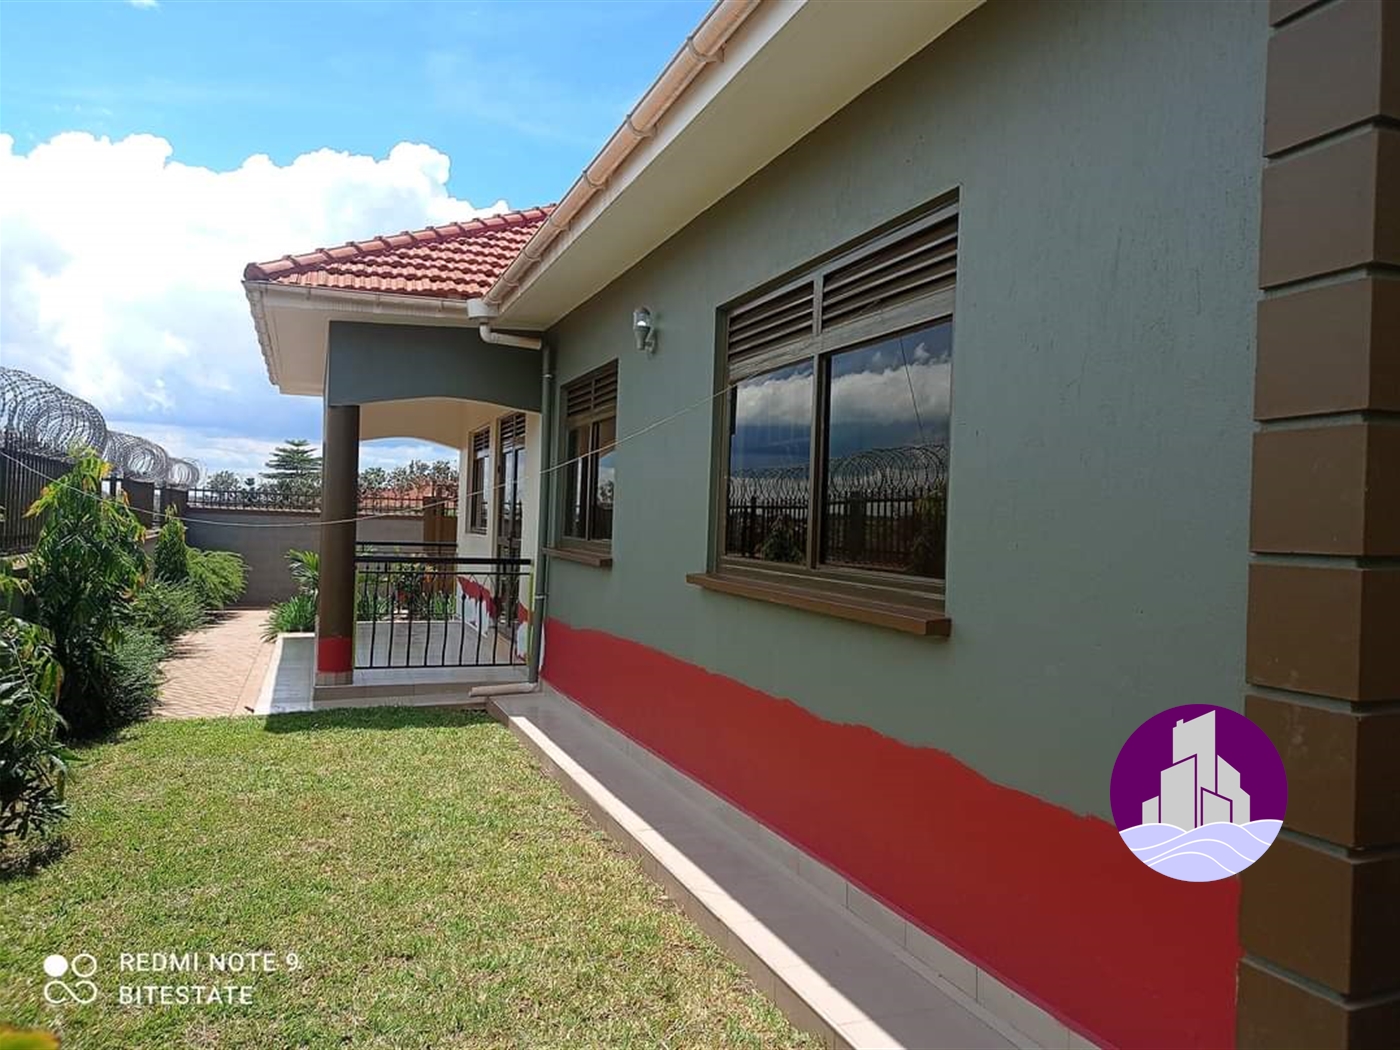 Storeyed house for rent in Kira Kampala